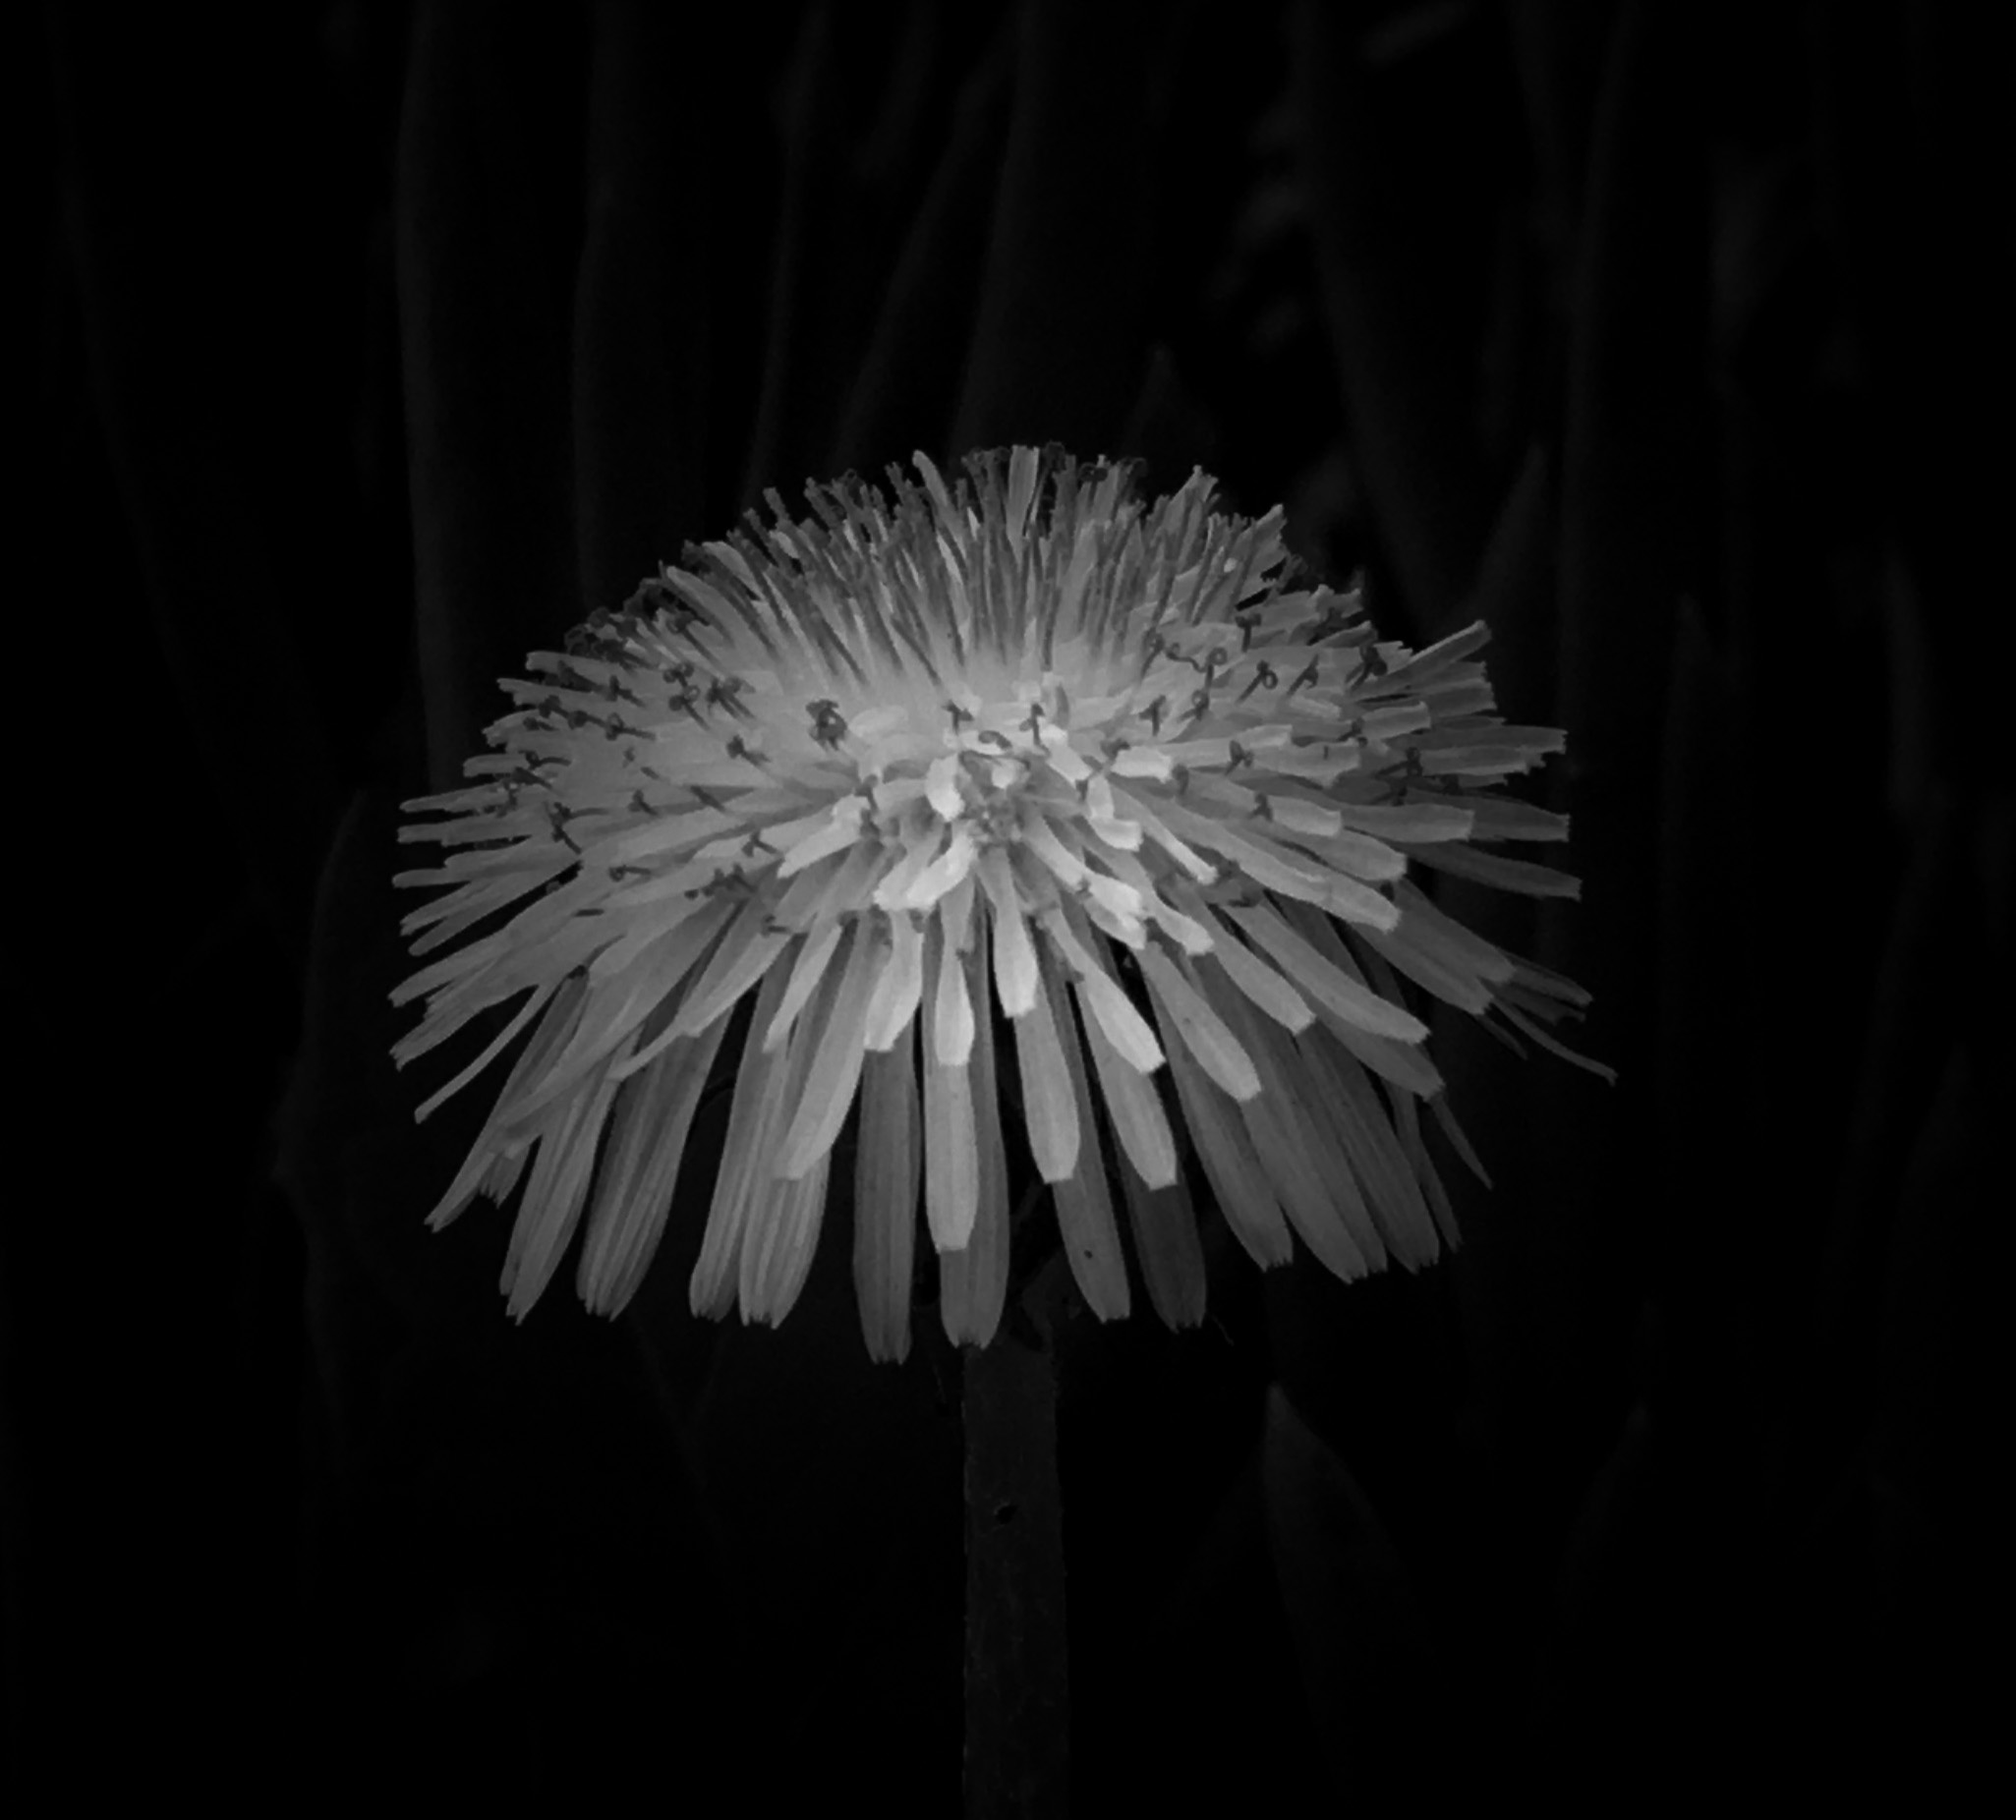 Dandelion in black and white by Jacob Wat